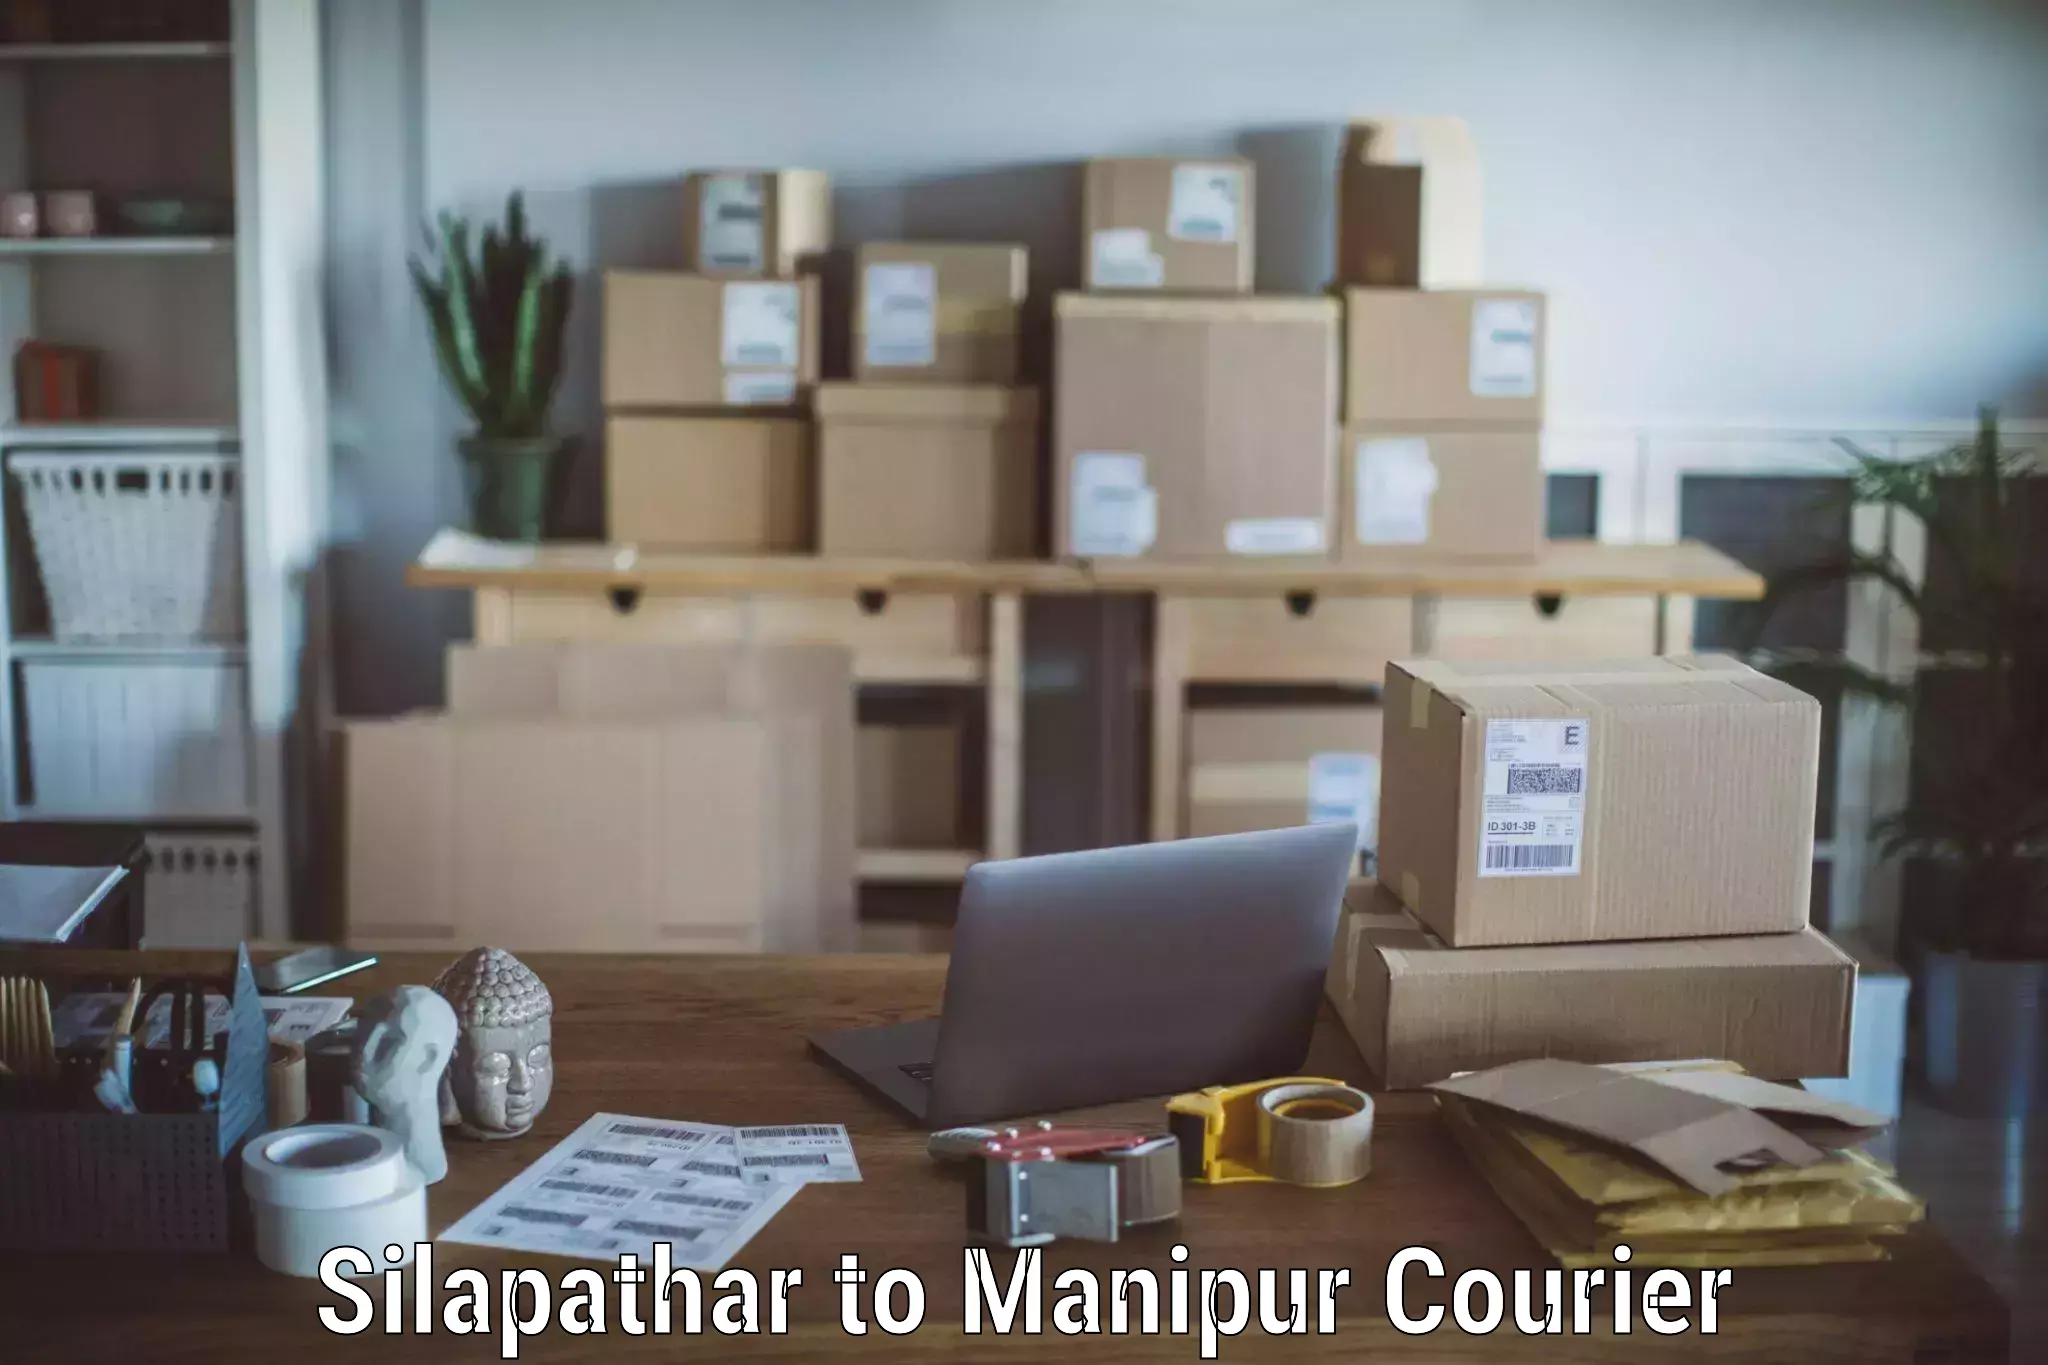 Furniture transport service Silapathar to Manipur